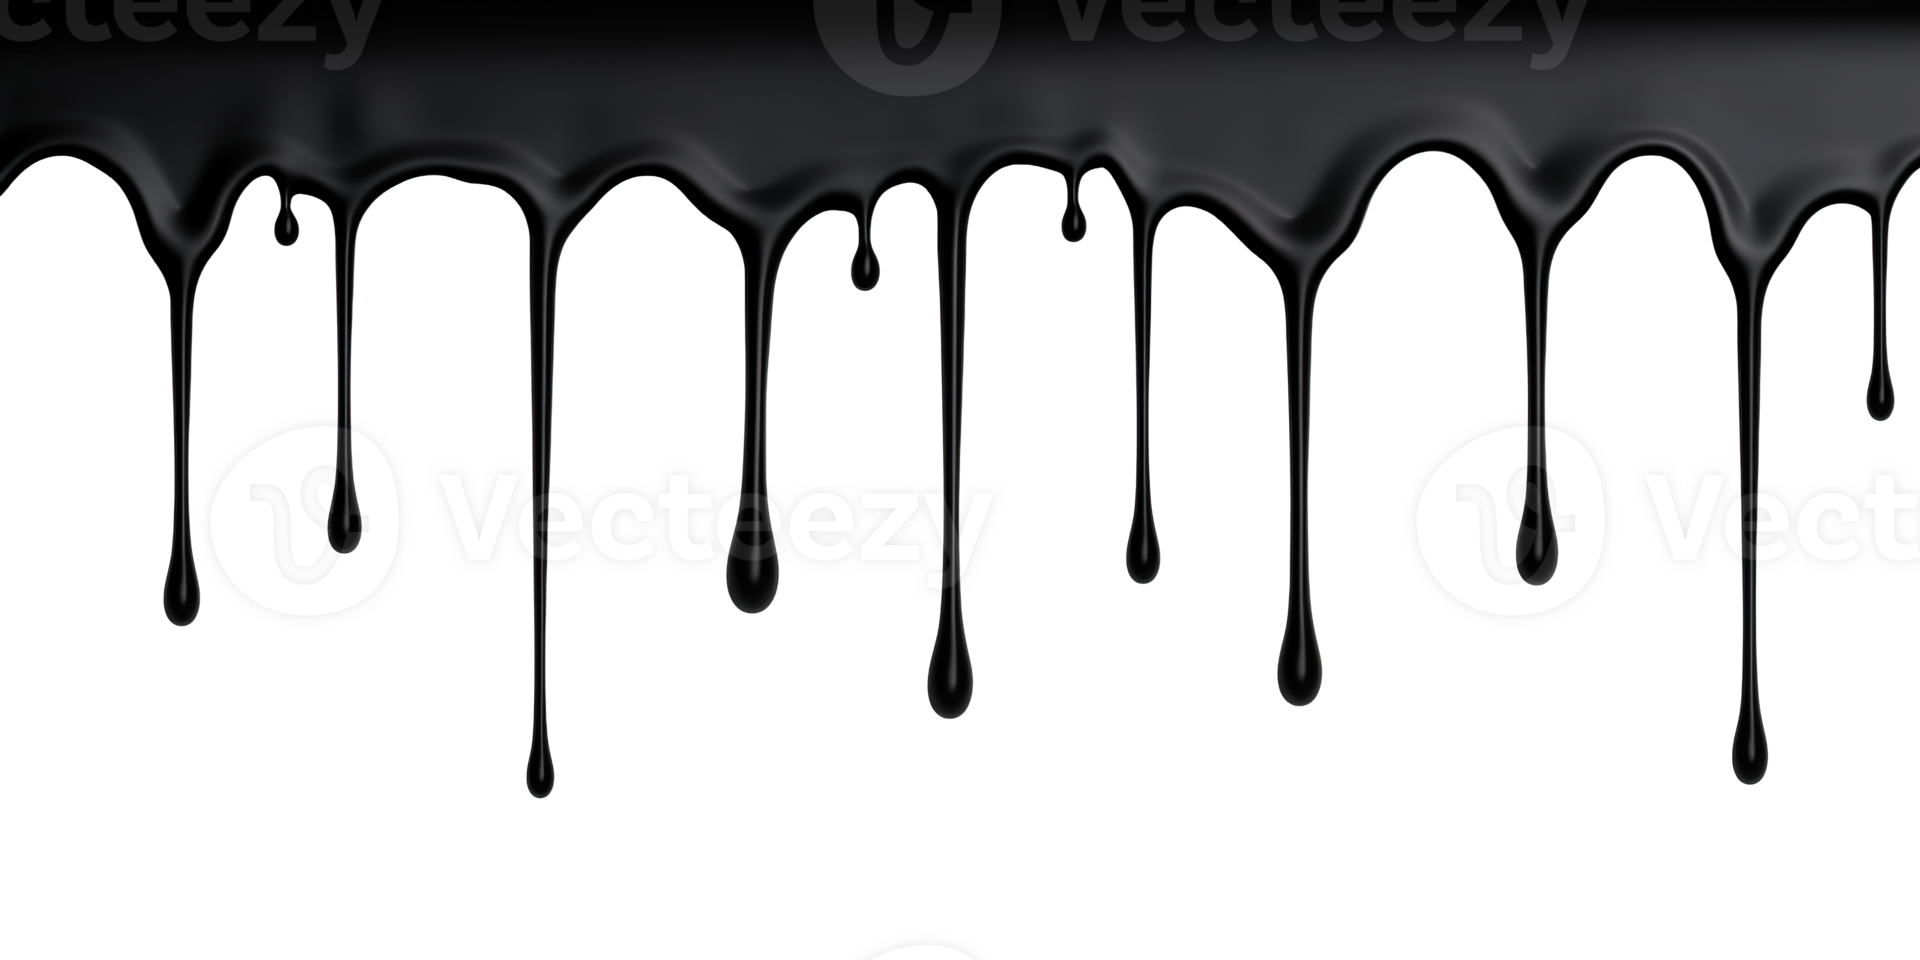 AI generated Black Paint Color Drips on Transparent Background, Fluid Art Design, Dynamic Flow of Dark Color, Perfect for Abstract and Artistic Backgrounds png